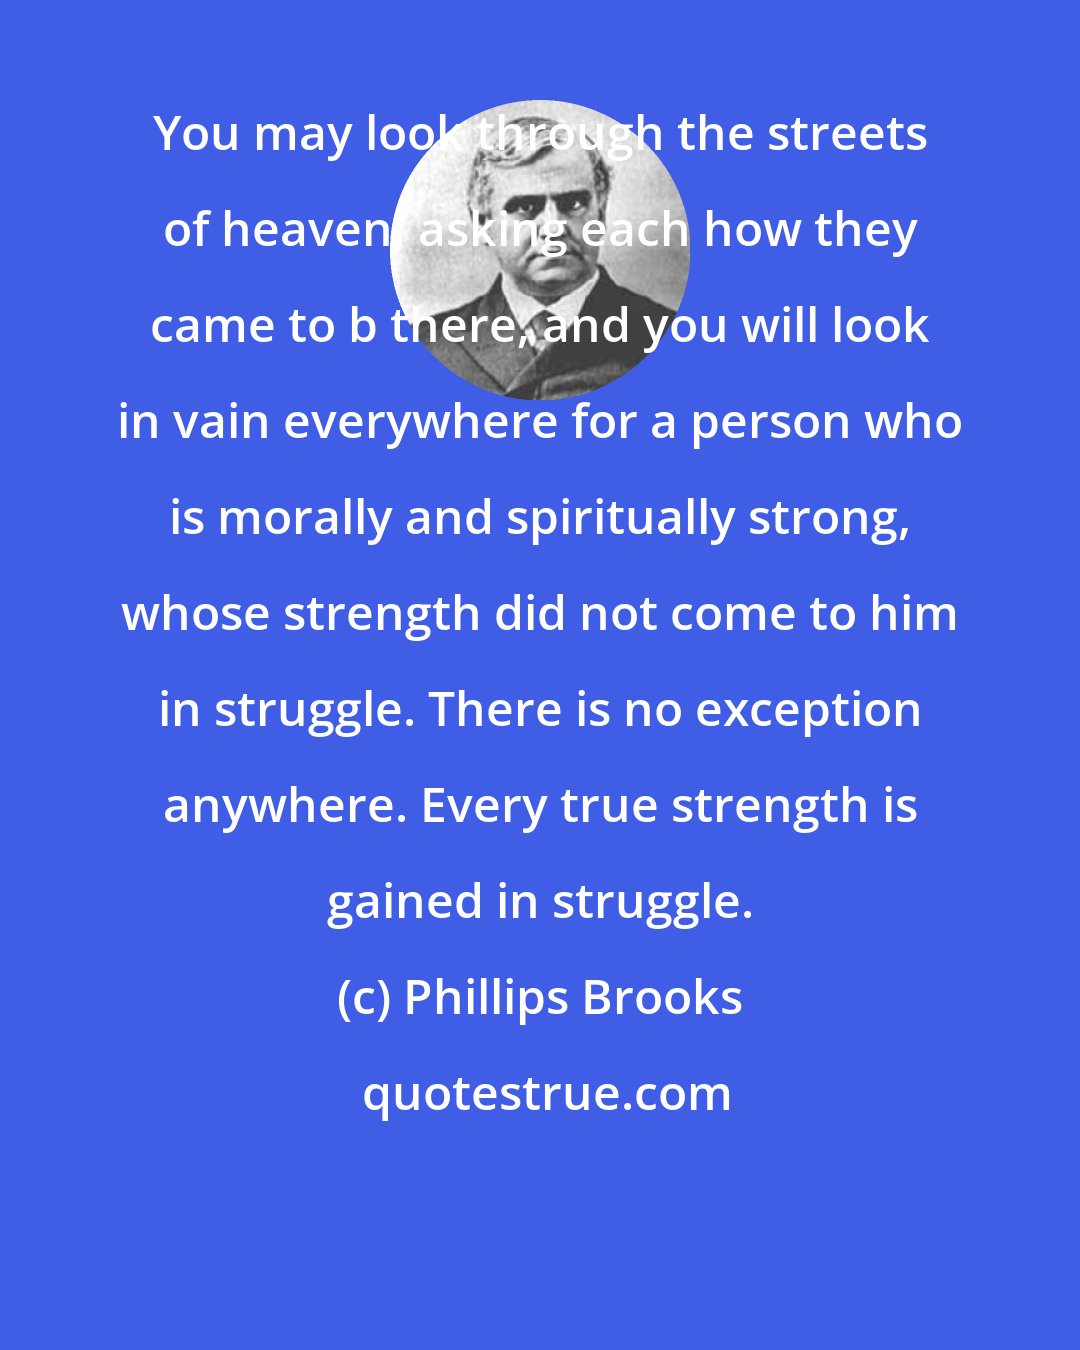 Phillips Brooks: You may look through the streets of heaven, asking each how they came to b there, and you will look in vain everywhere for a person who is morally and spiritually strong, whose strength did not come to him in struggle. There is no exception anywhere. Every true strength is gained in struggle.